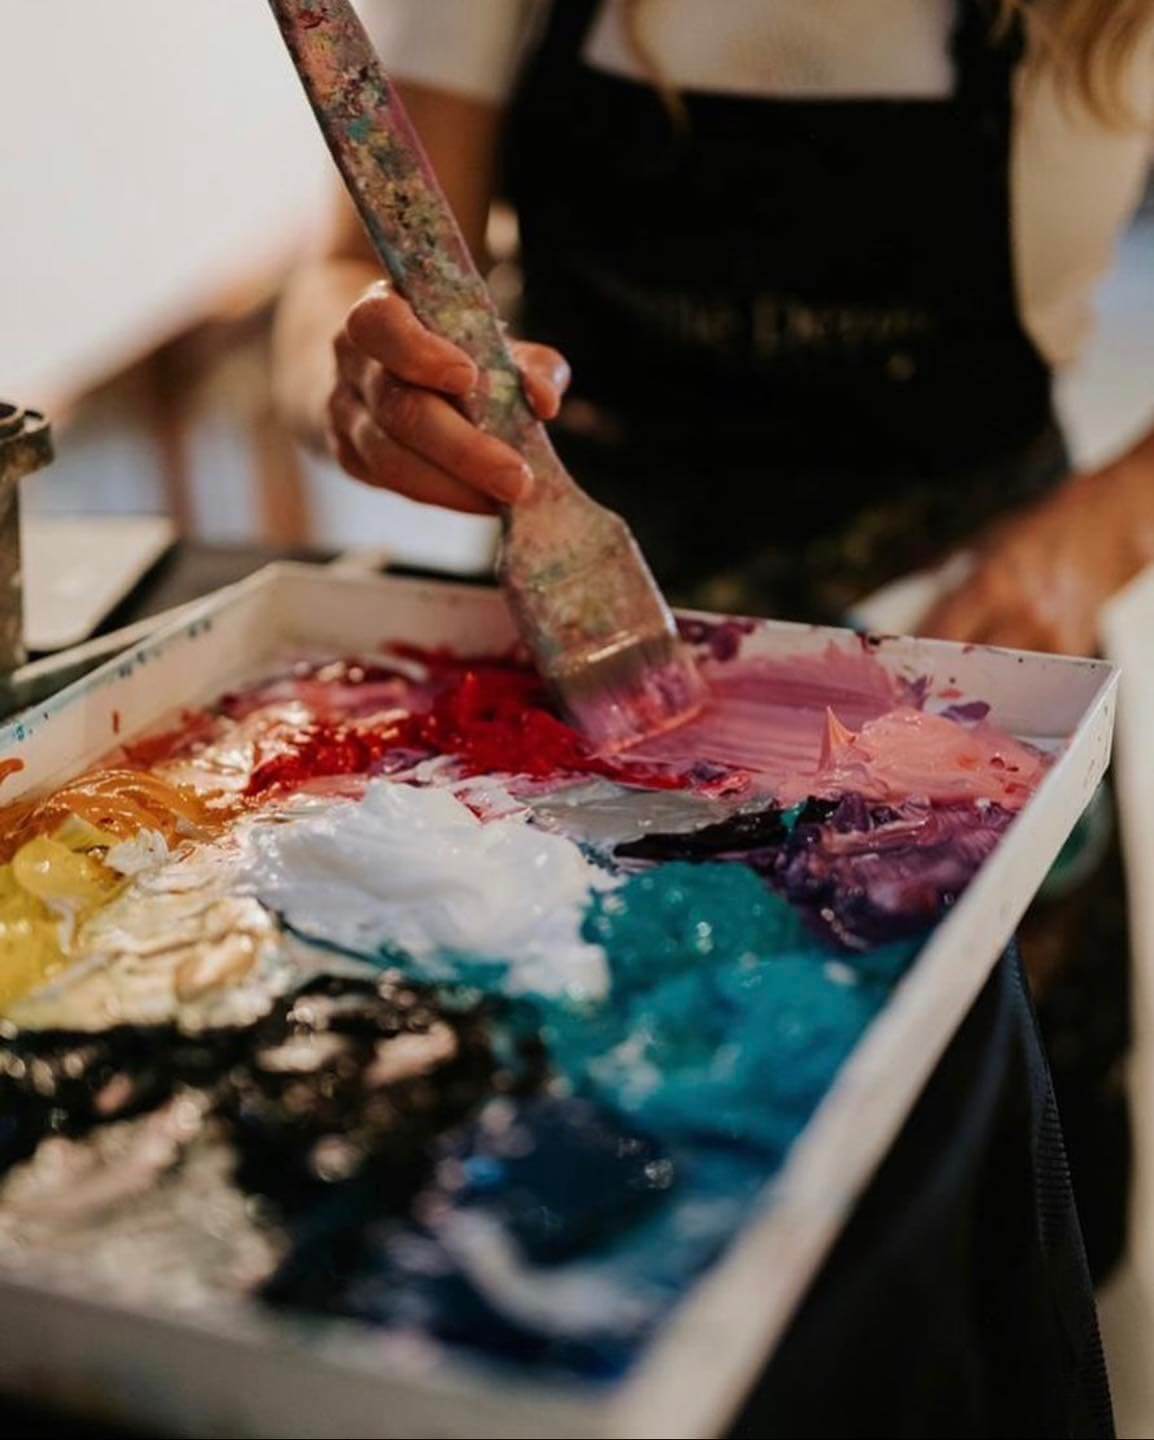 Photograph of Giselle Denis' creative process. She uses a big, wooden brush to mix the paint, so she can reach the hue she needs for her painting.